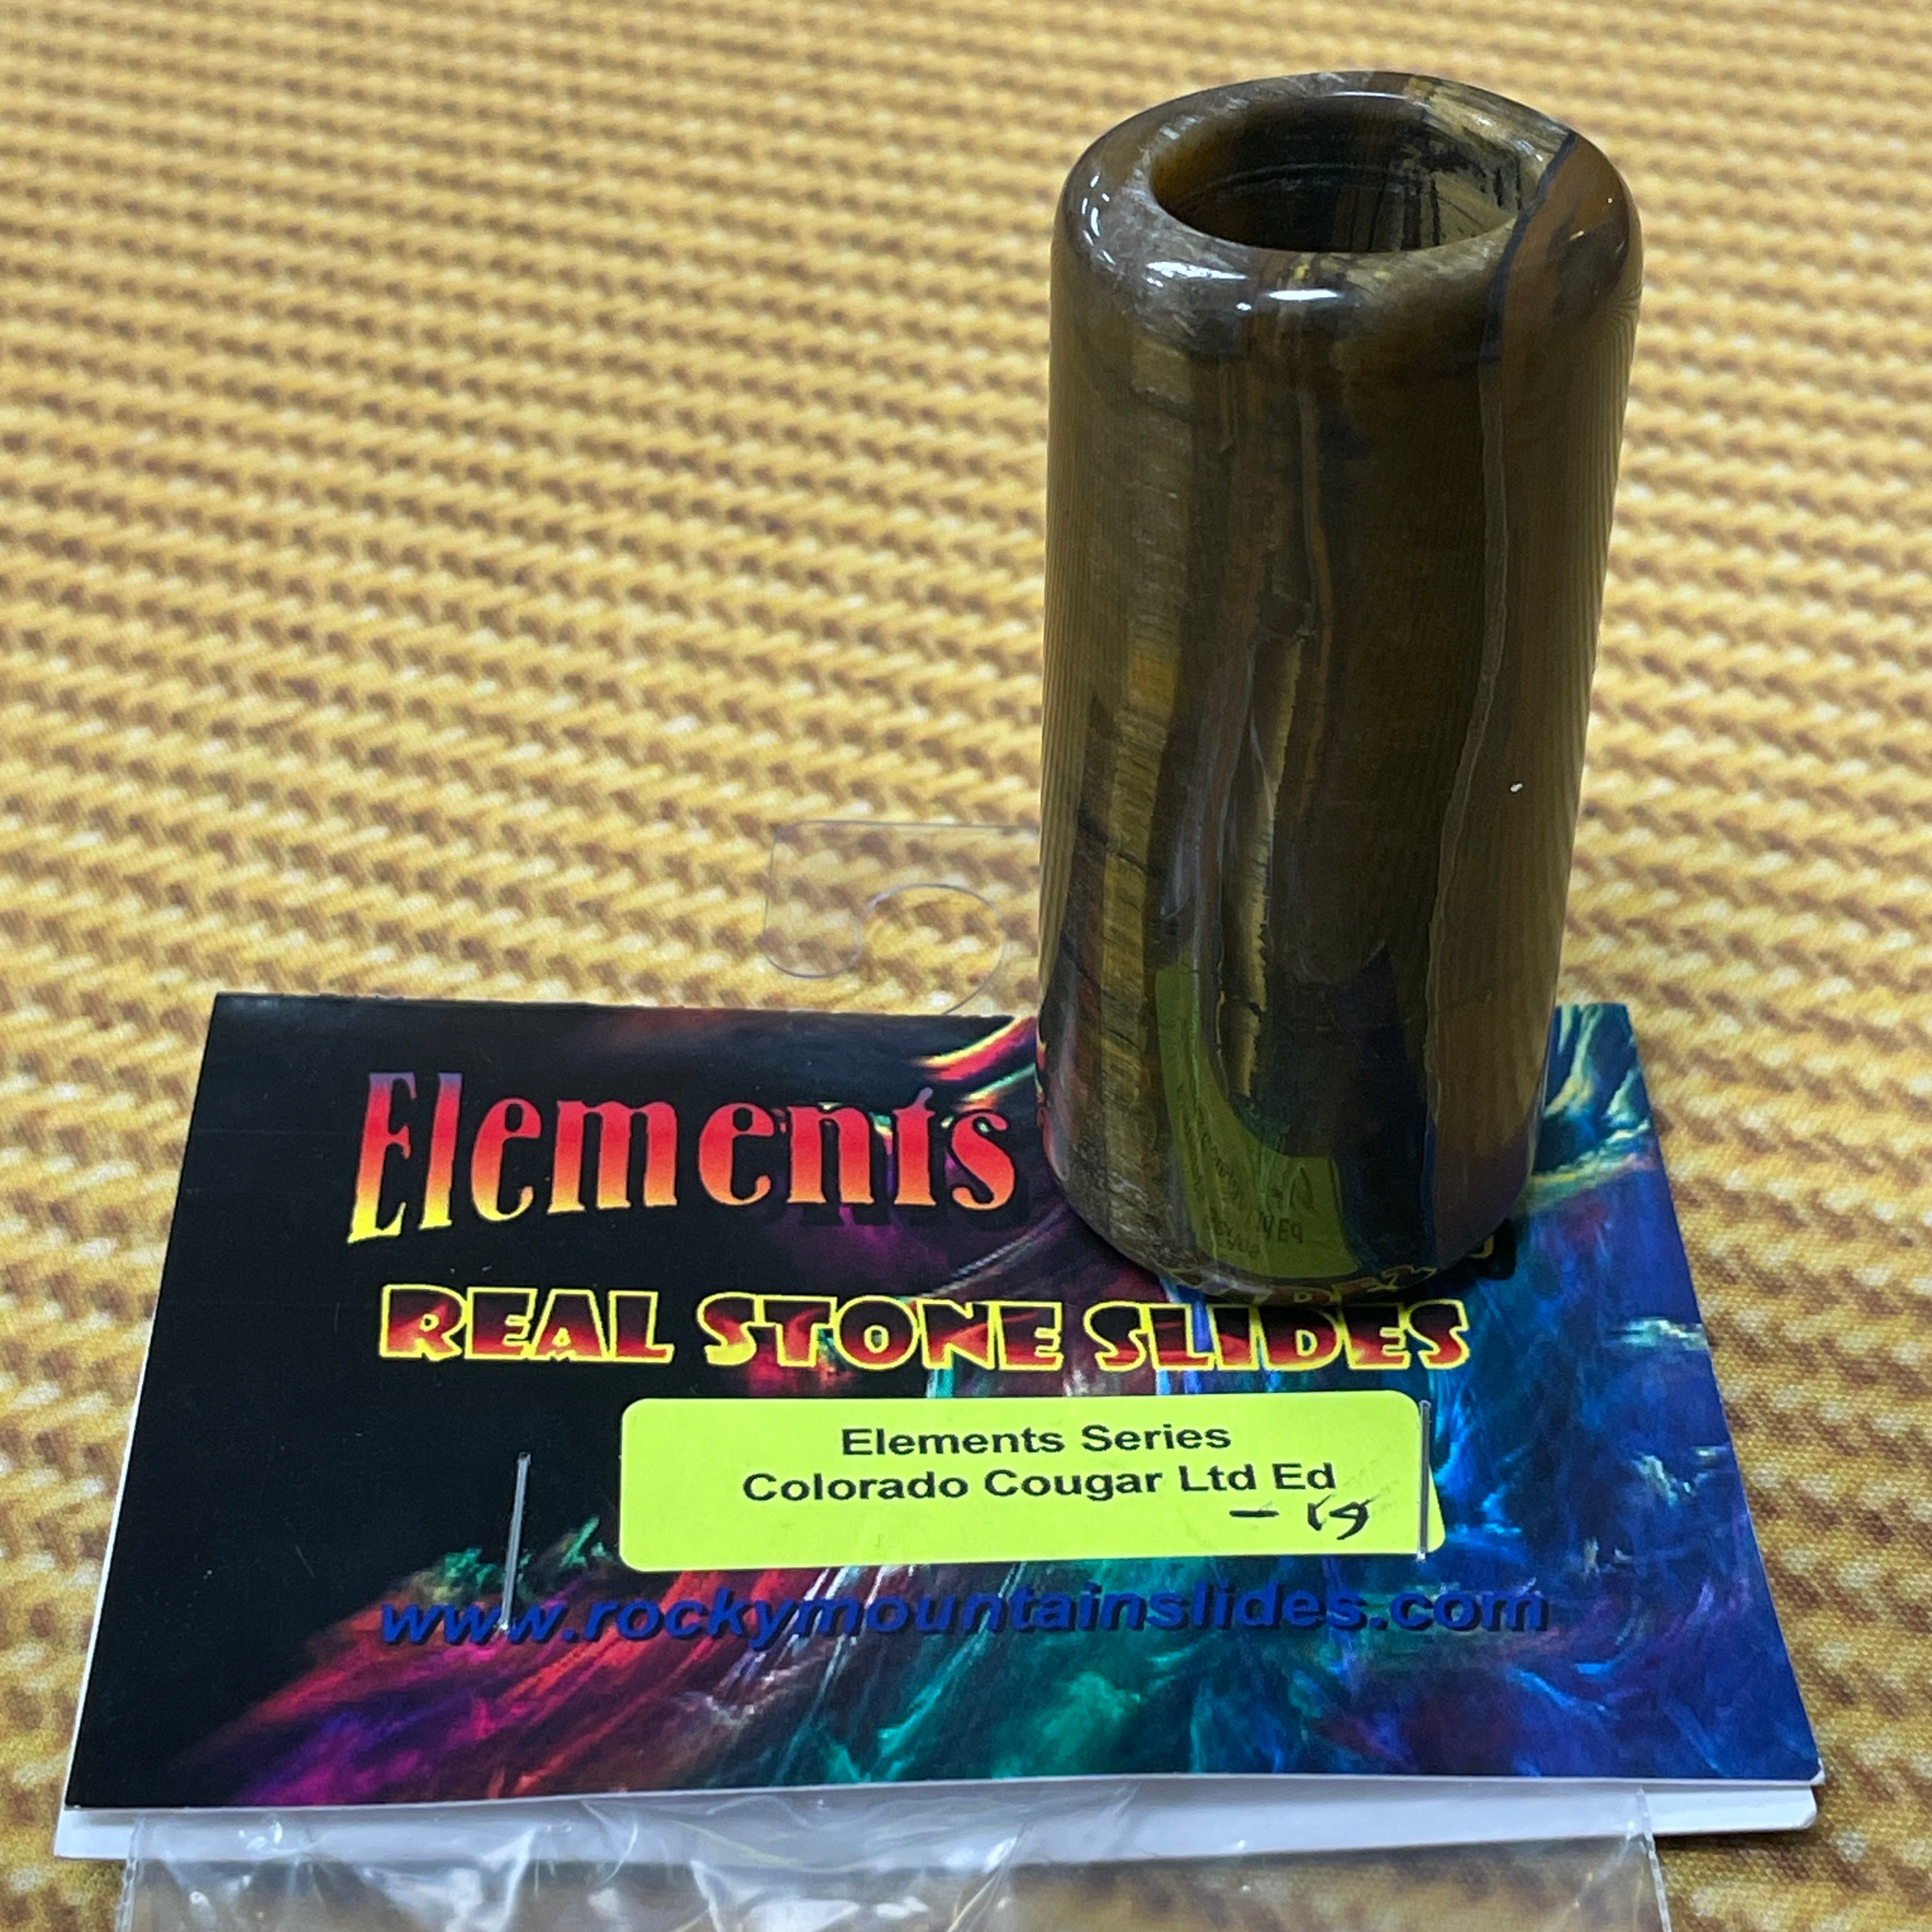 Rocky Mountain Slide Company  Elements Series Stone Slides (Limited Edition Colorado Cougar 19mm)